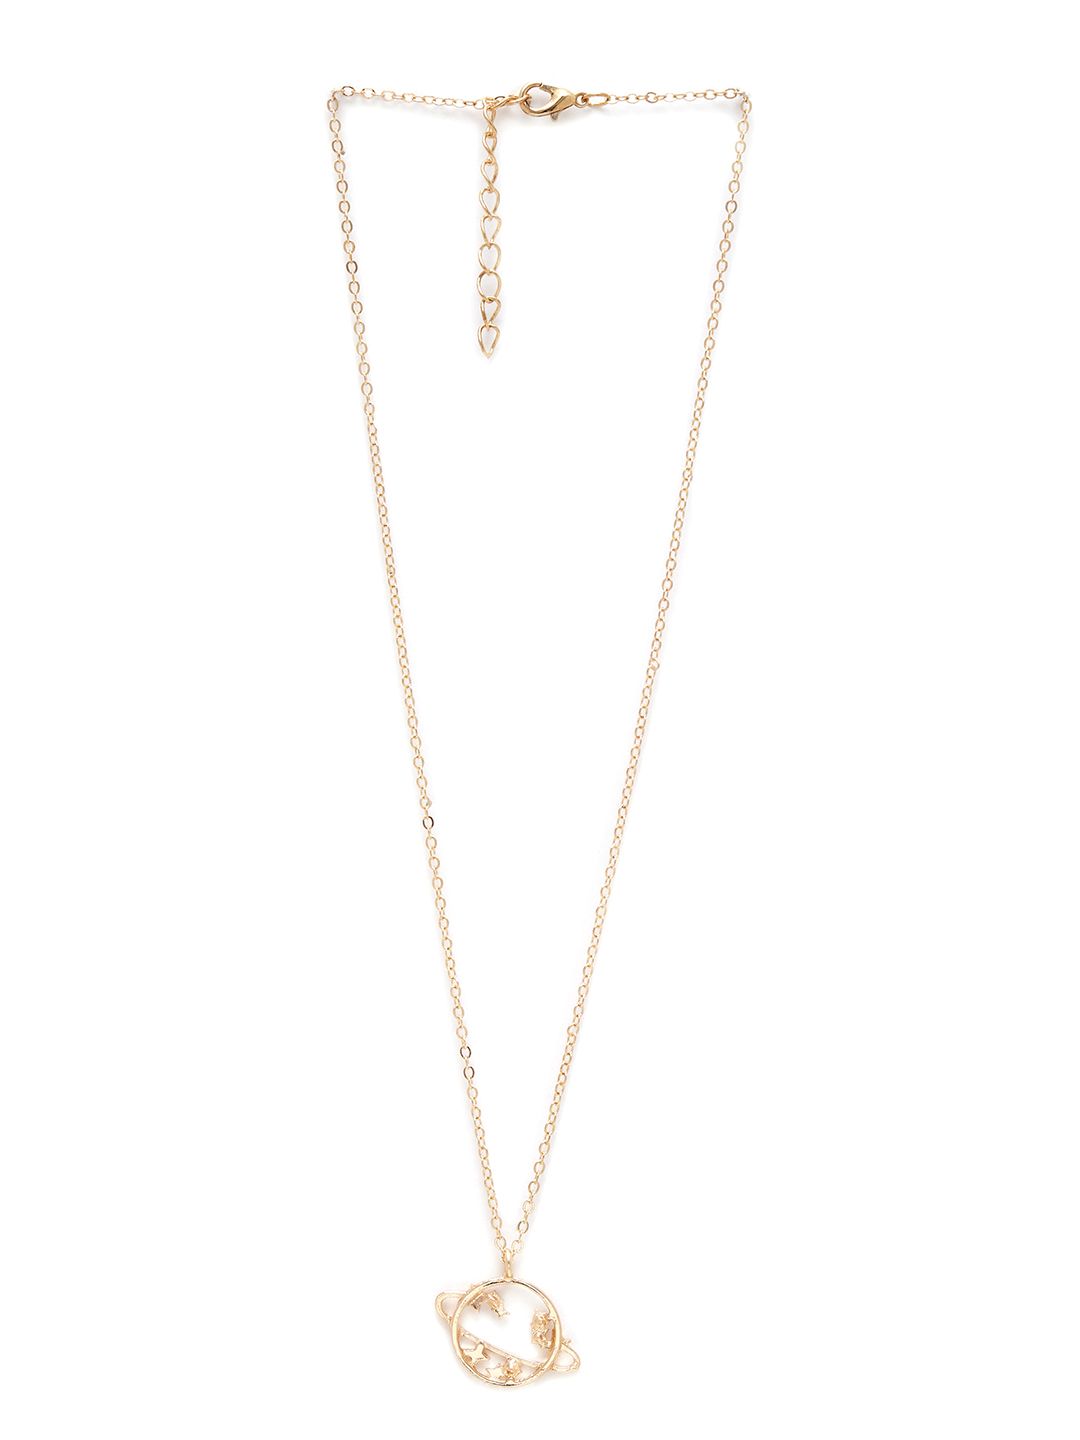 URBANIC Women Gold-Toned Necklace Price in India